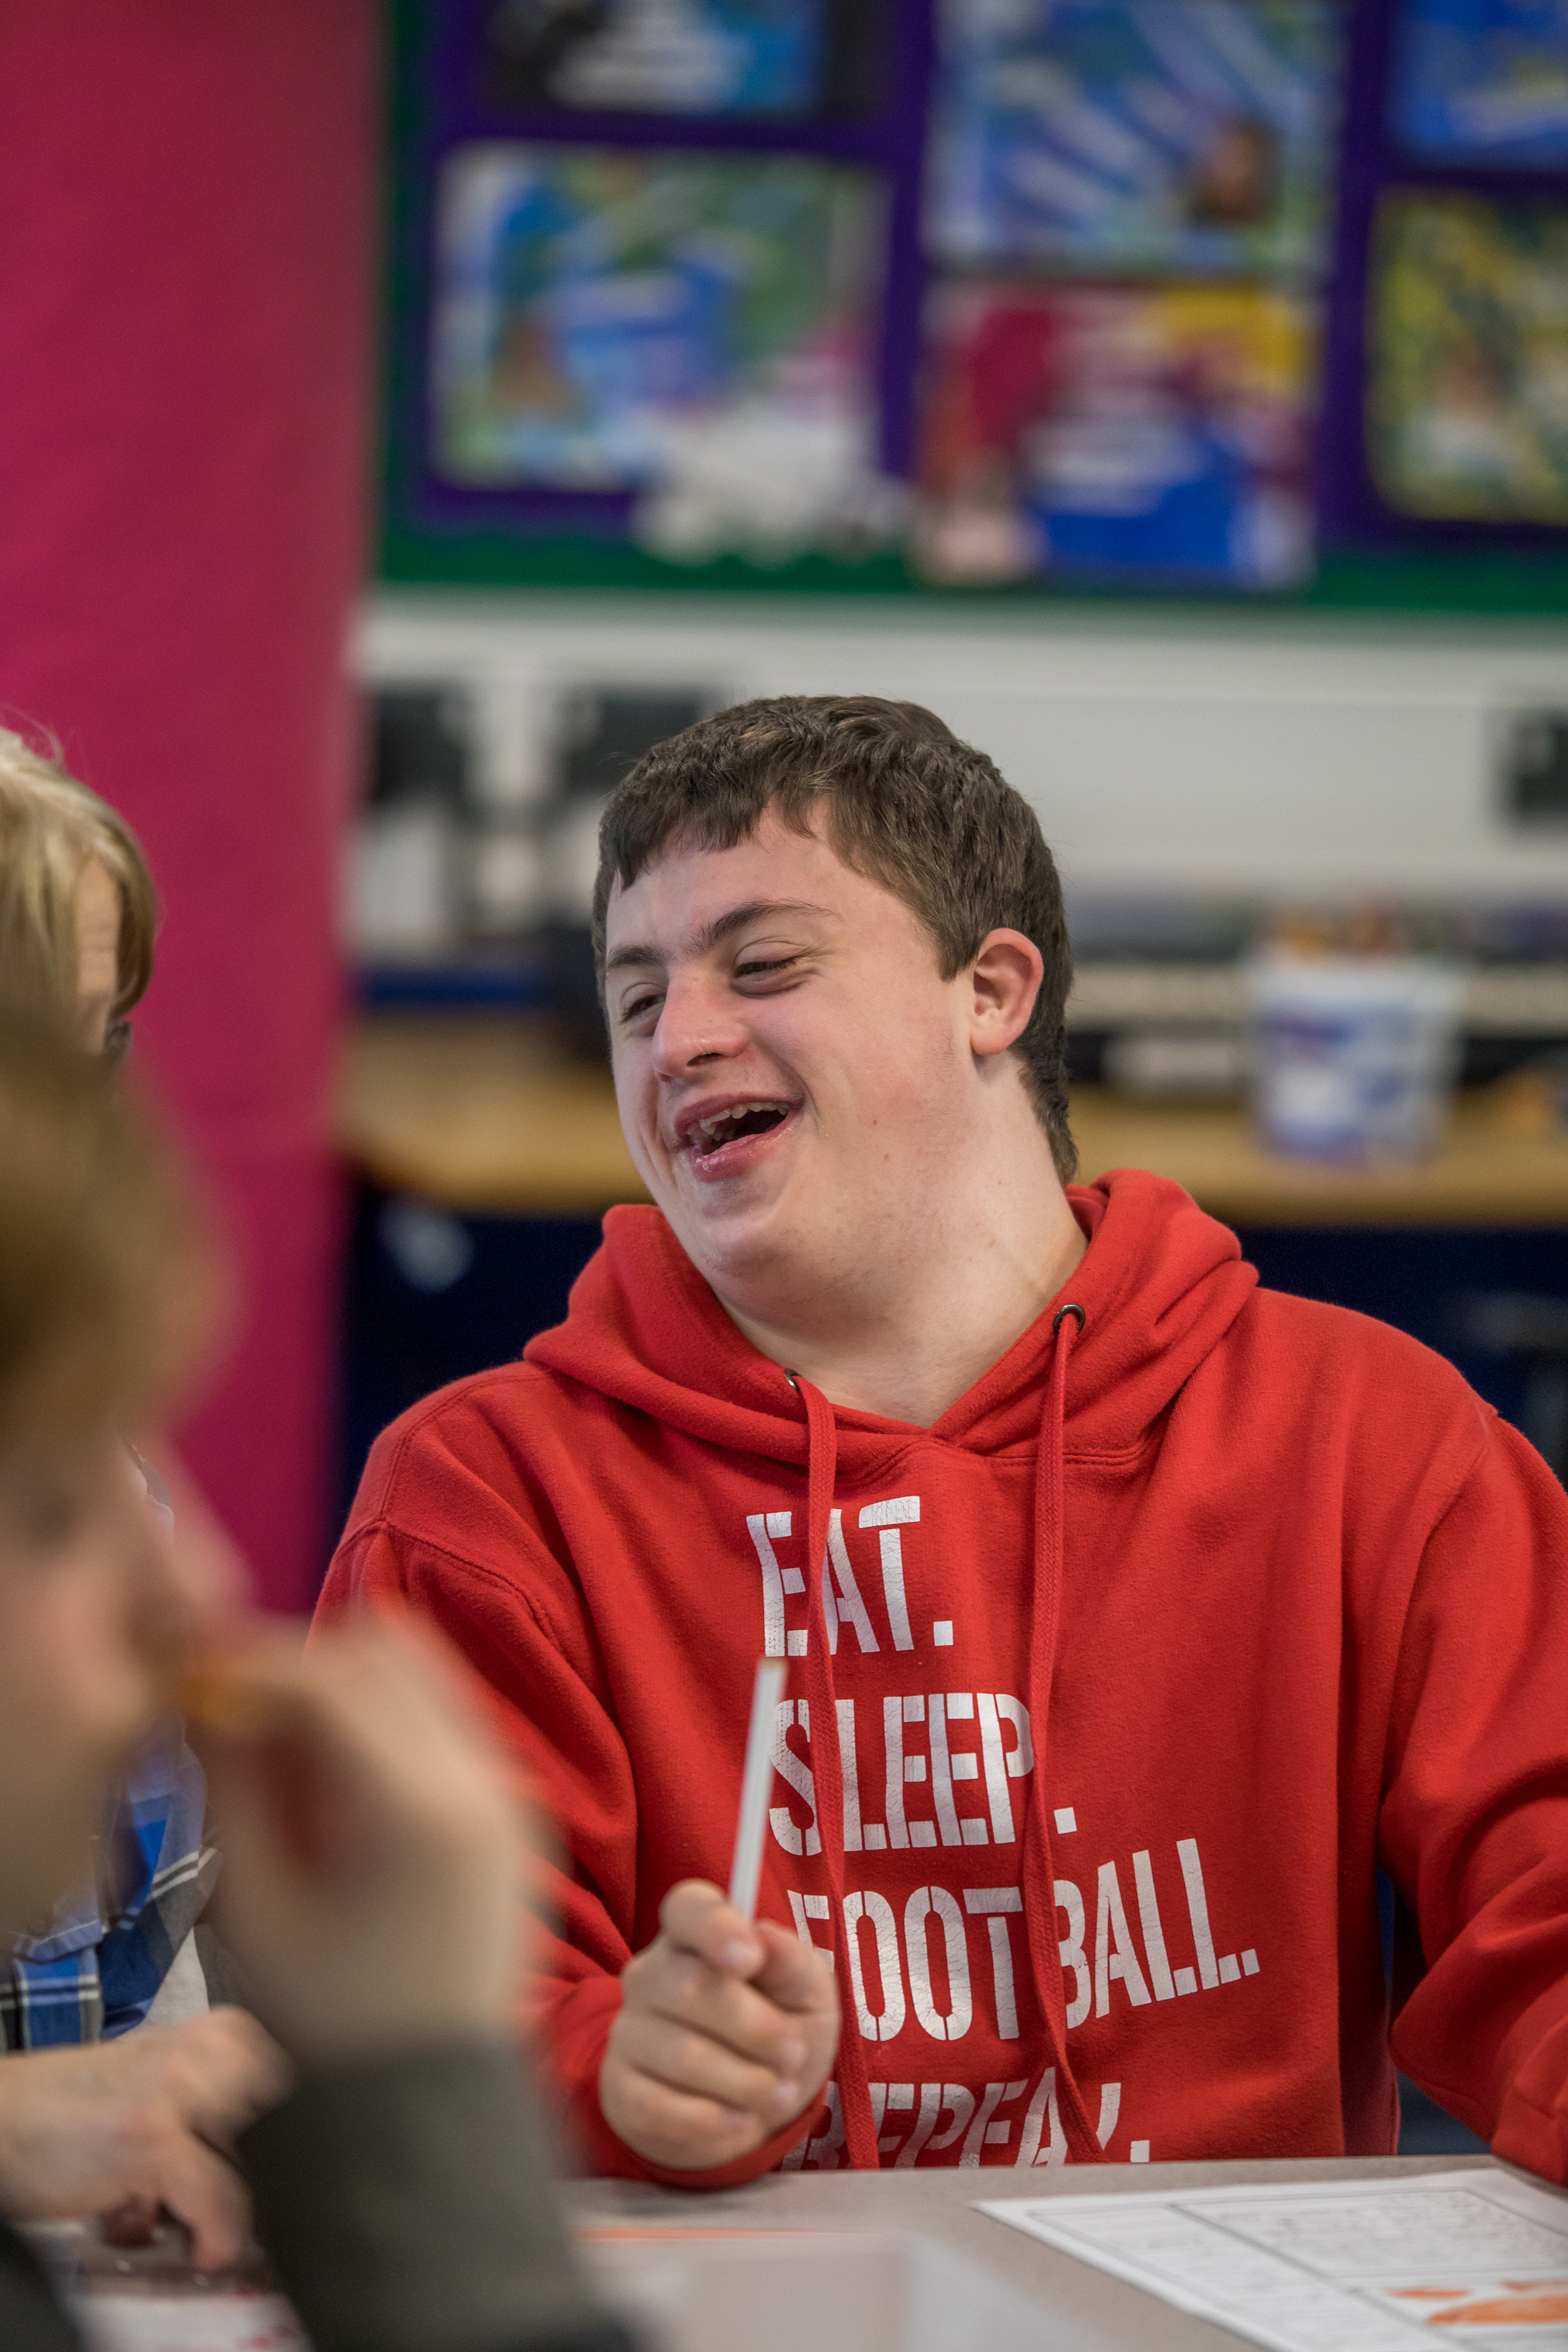 Young man with Downs Syndrome in a red jumper laughing